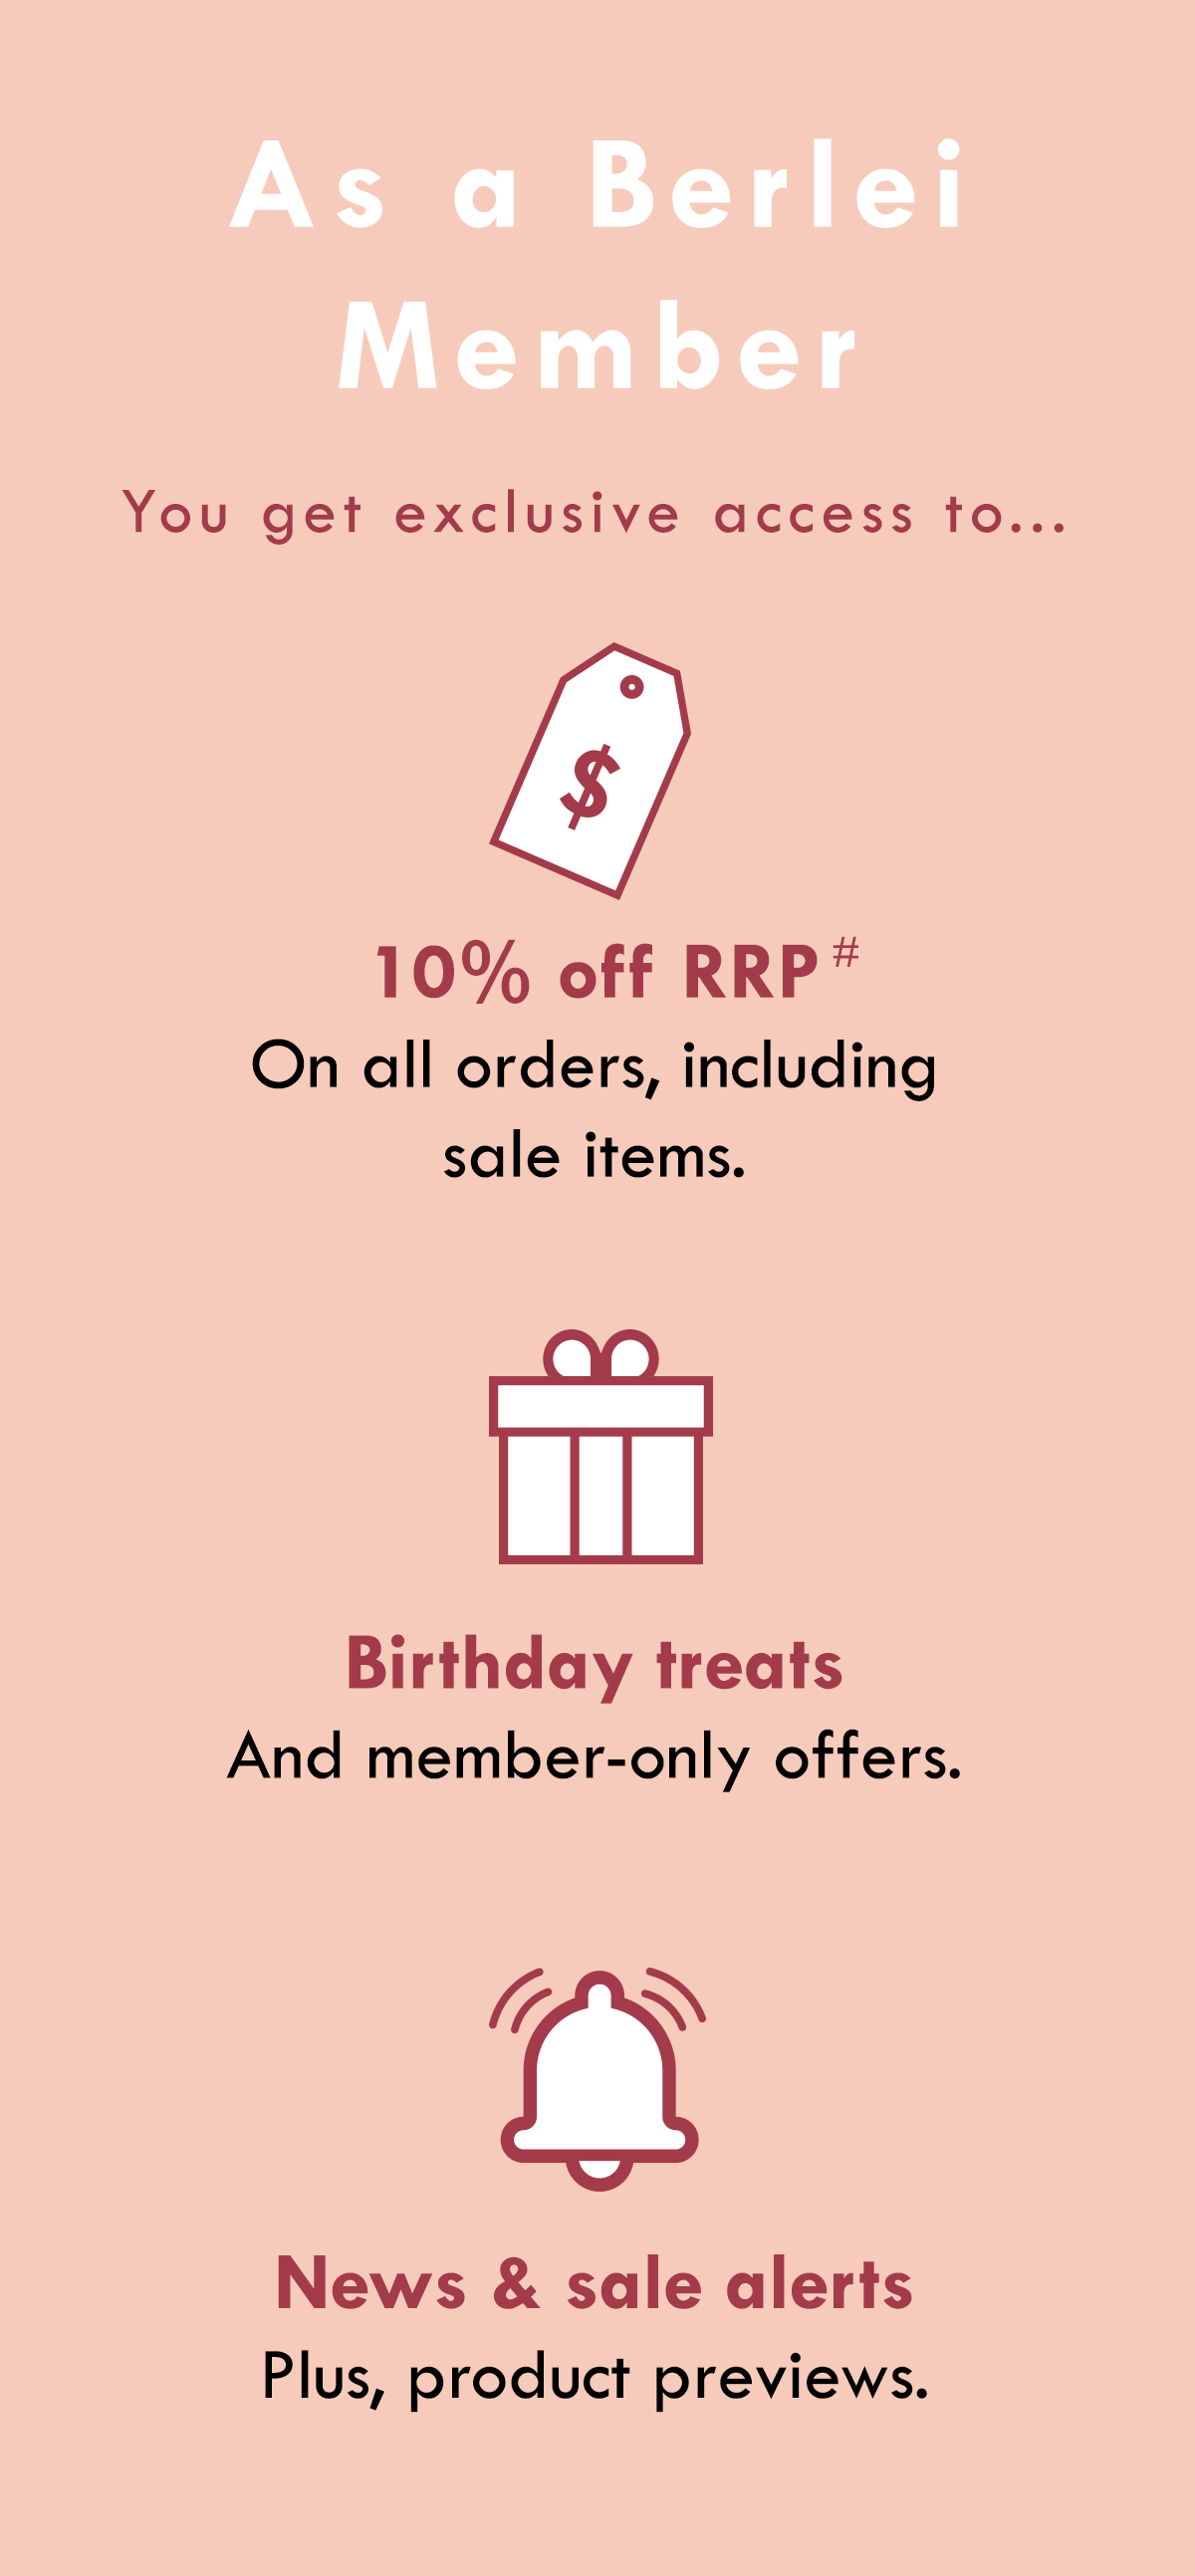 As a Berlei Member you get exclusive access to... 10% off RRP on all orders, including sale items. Birthday treats and member-only offers. News & sale alerts, plus product previews.